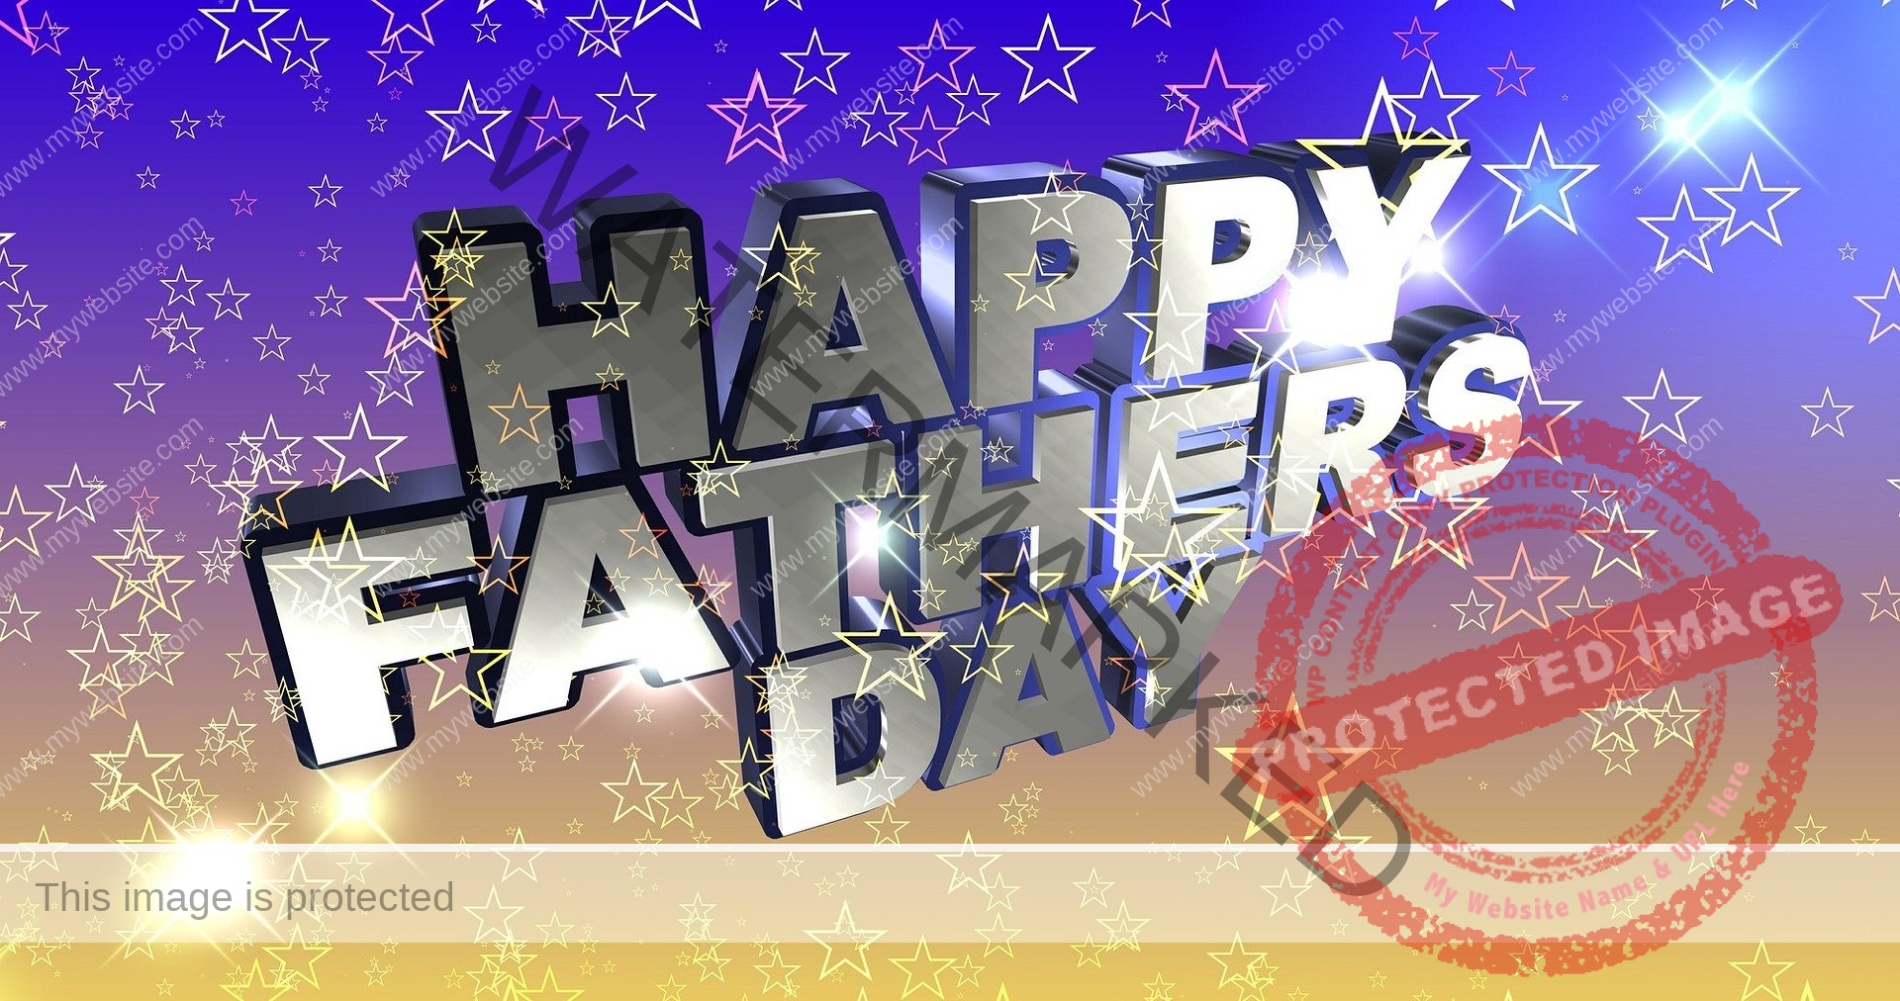 Every year the third Sunday of the month, June is celebrated as Father’s Day worldwide.